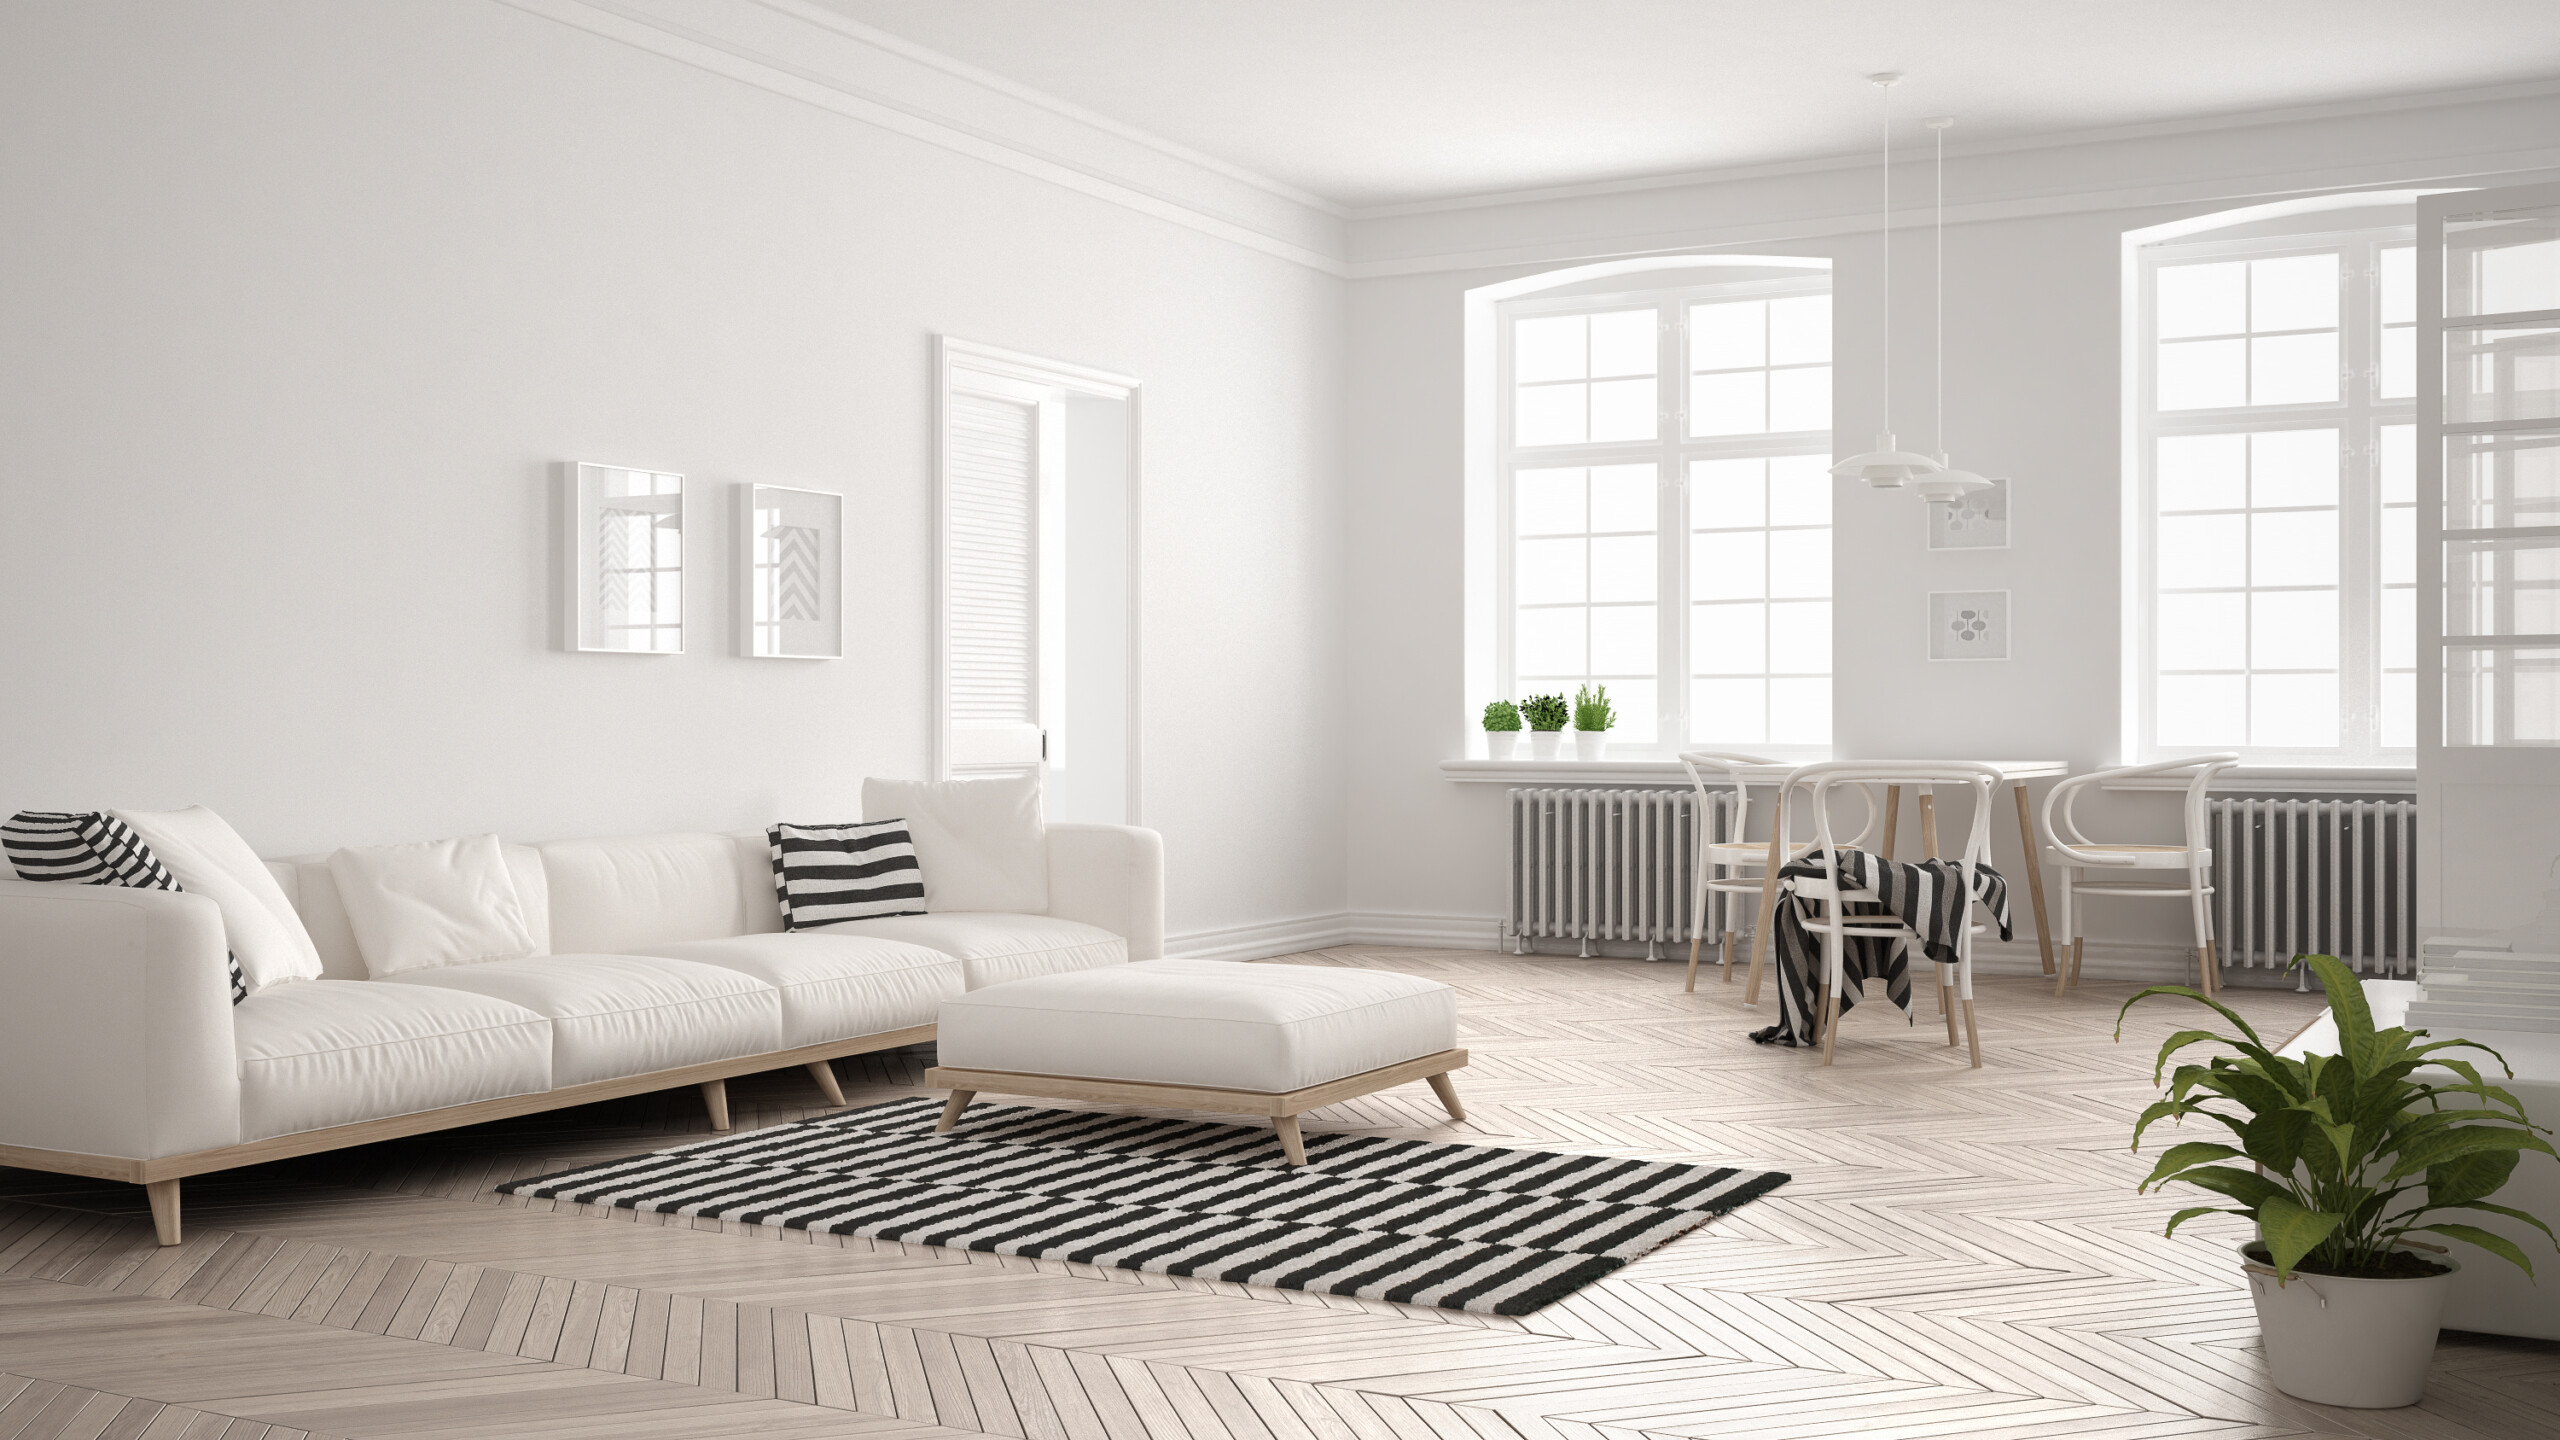 Minimalist Interior Design Defined And How To Make It Work - Décor Aid